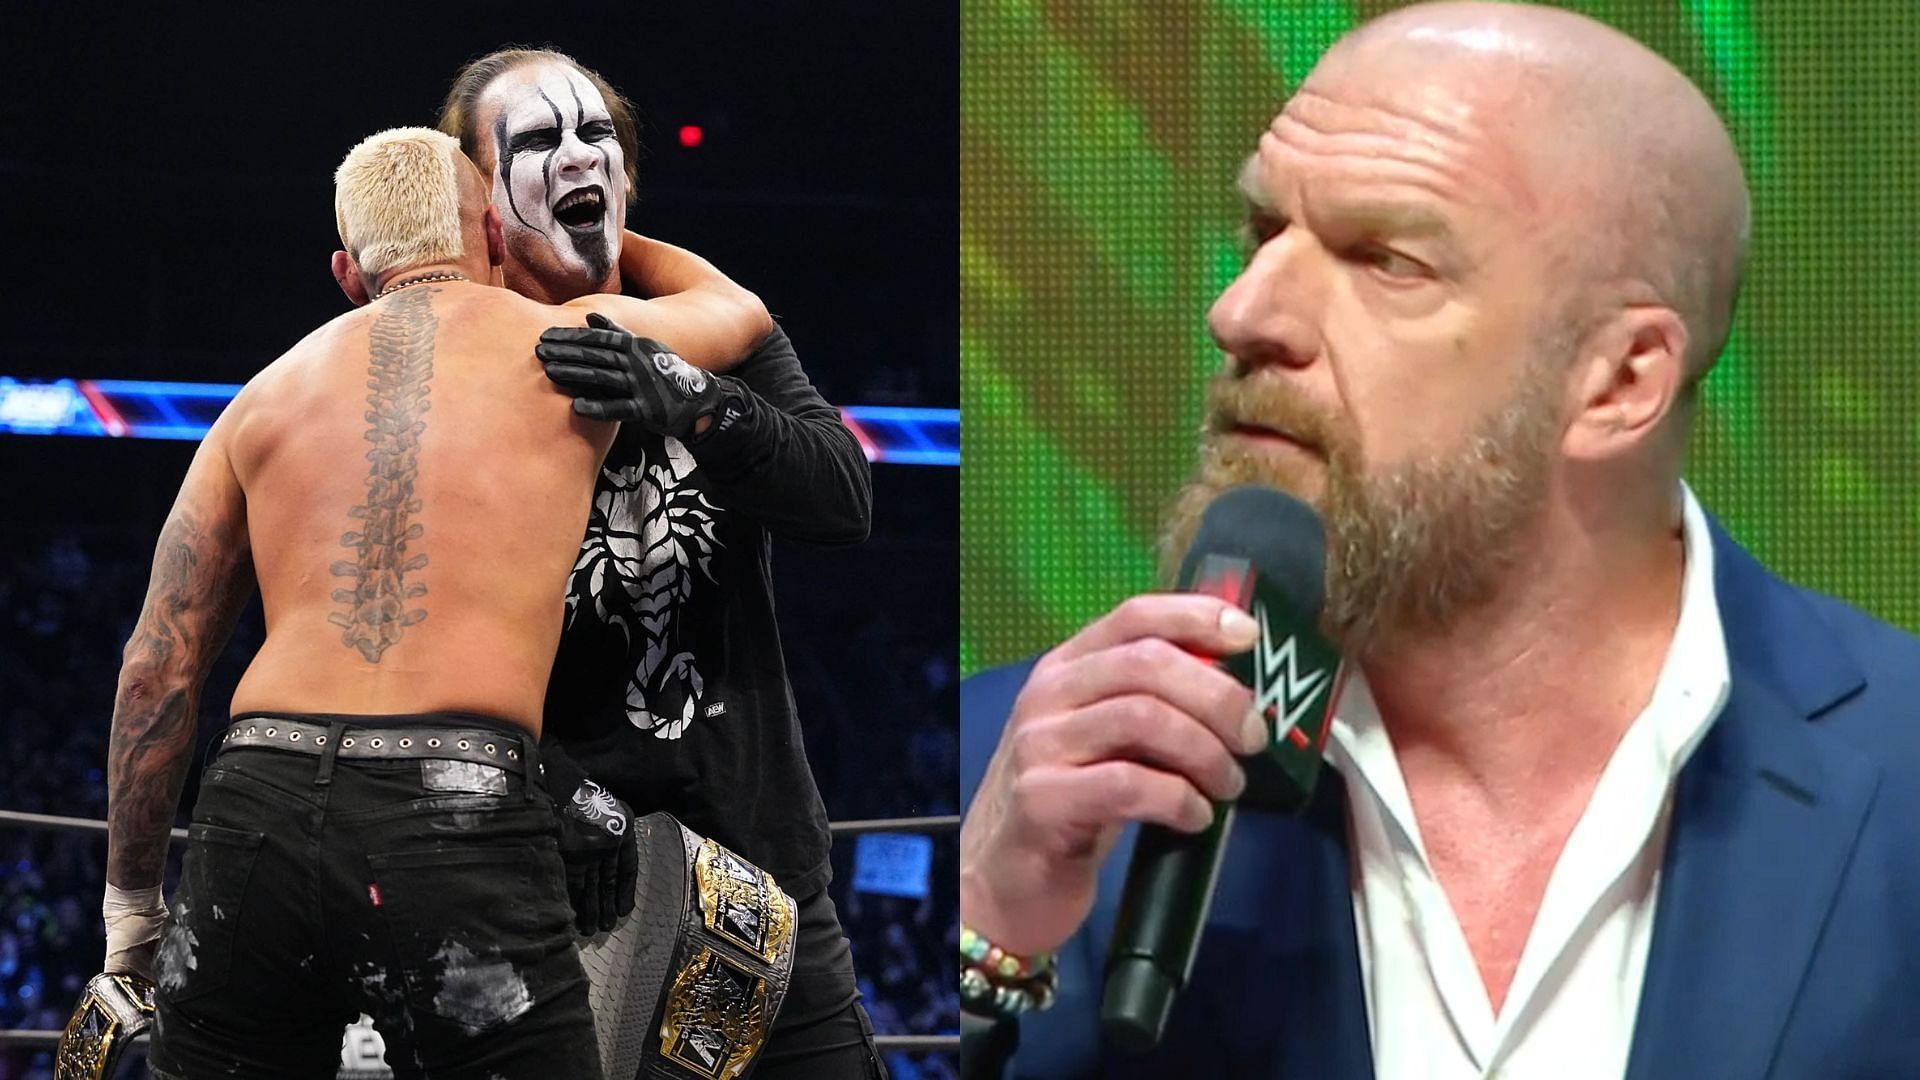 Sting will have his retirement match next week at AEW Revolution [Photos courtesy of AEW and WWE